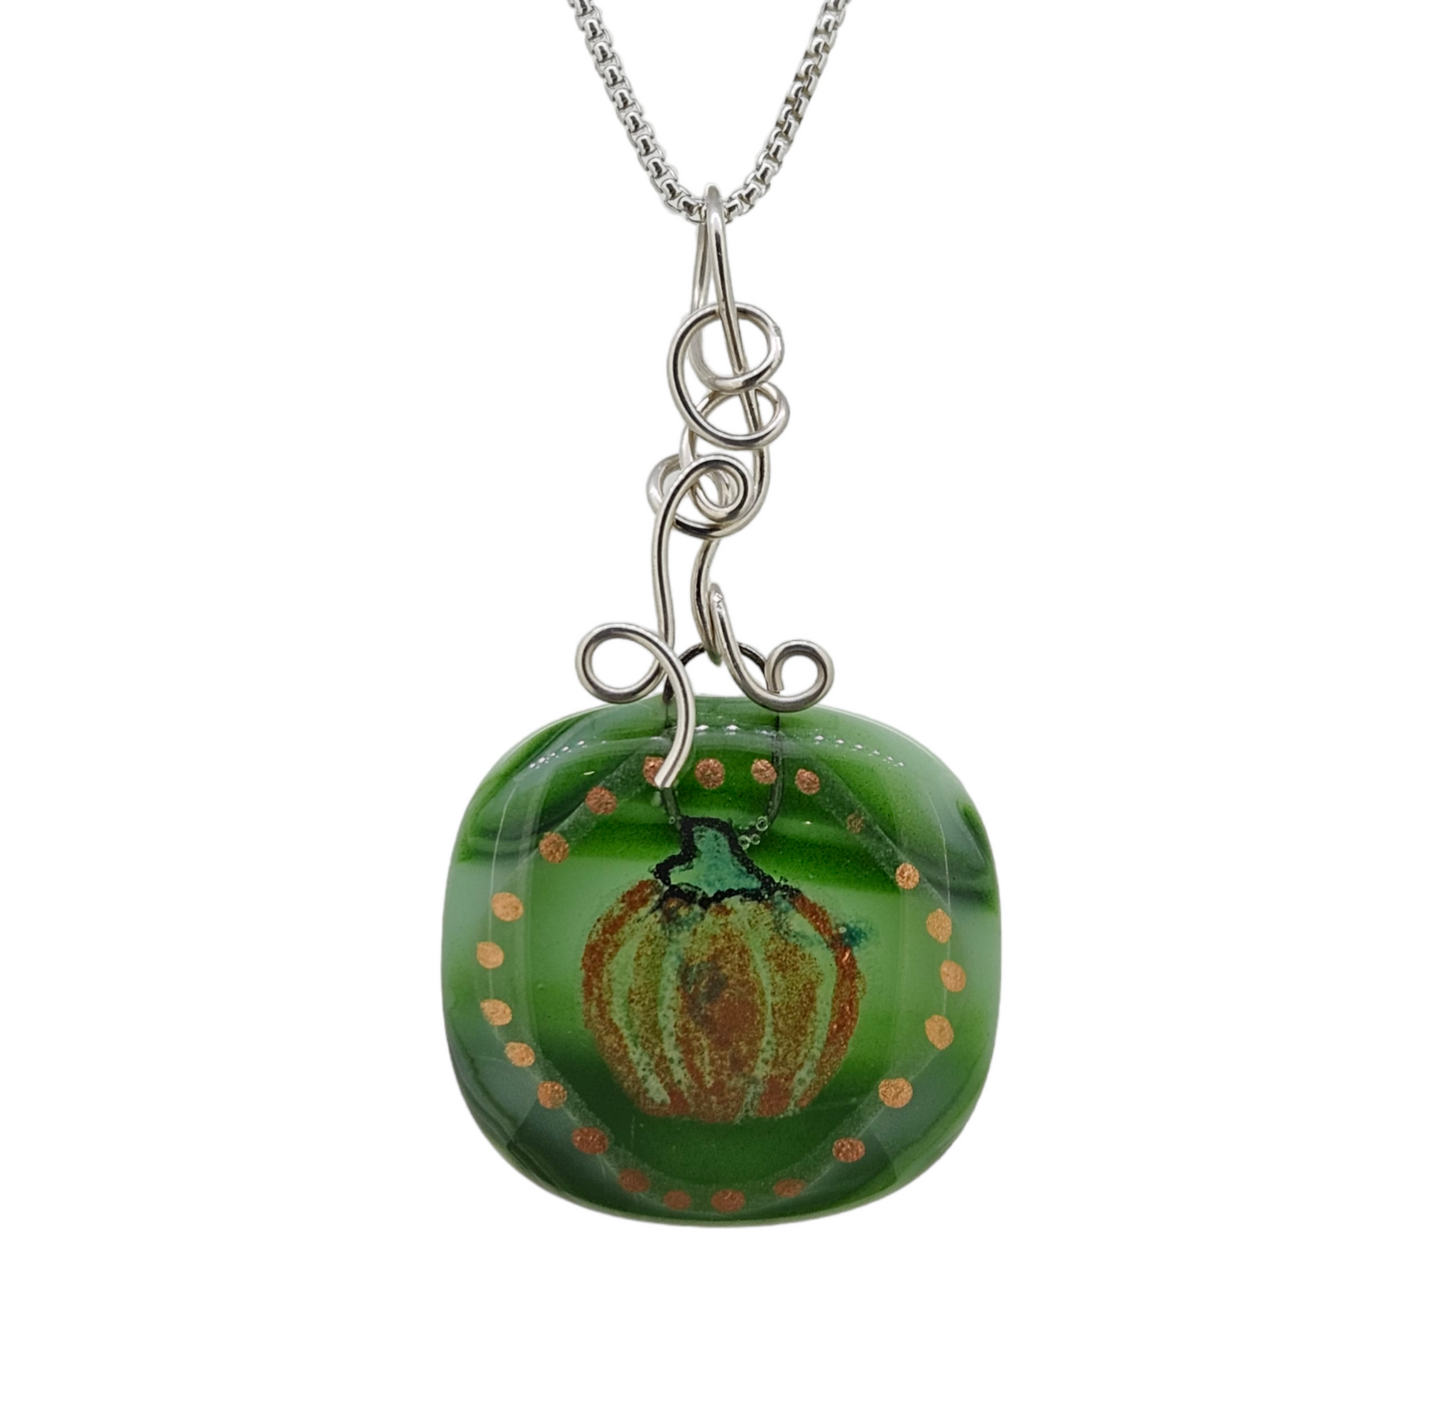 Handpainted Pumpkin Fused Glass Necklace